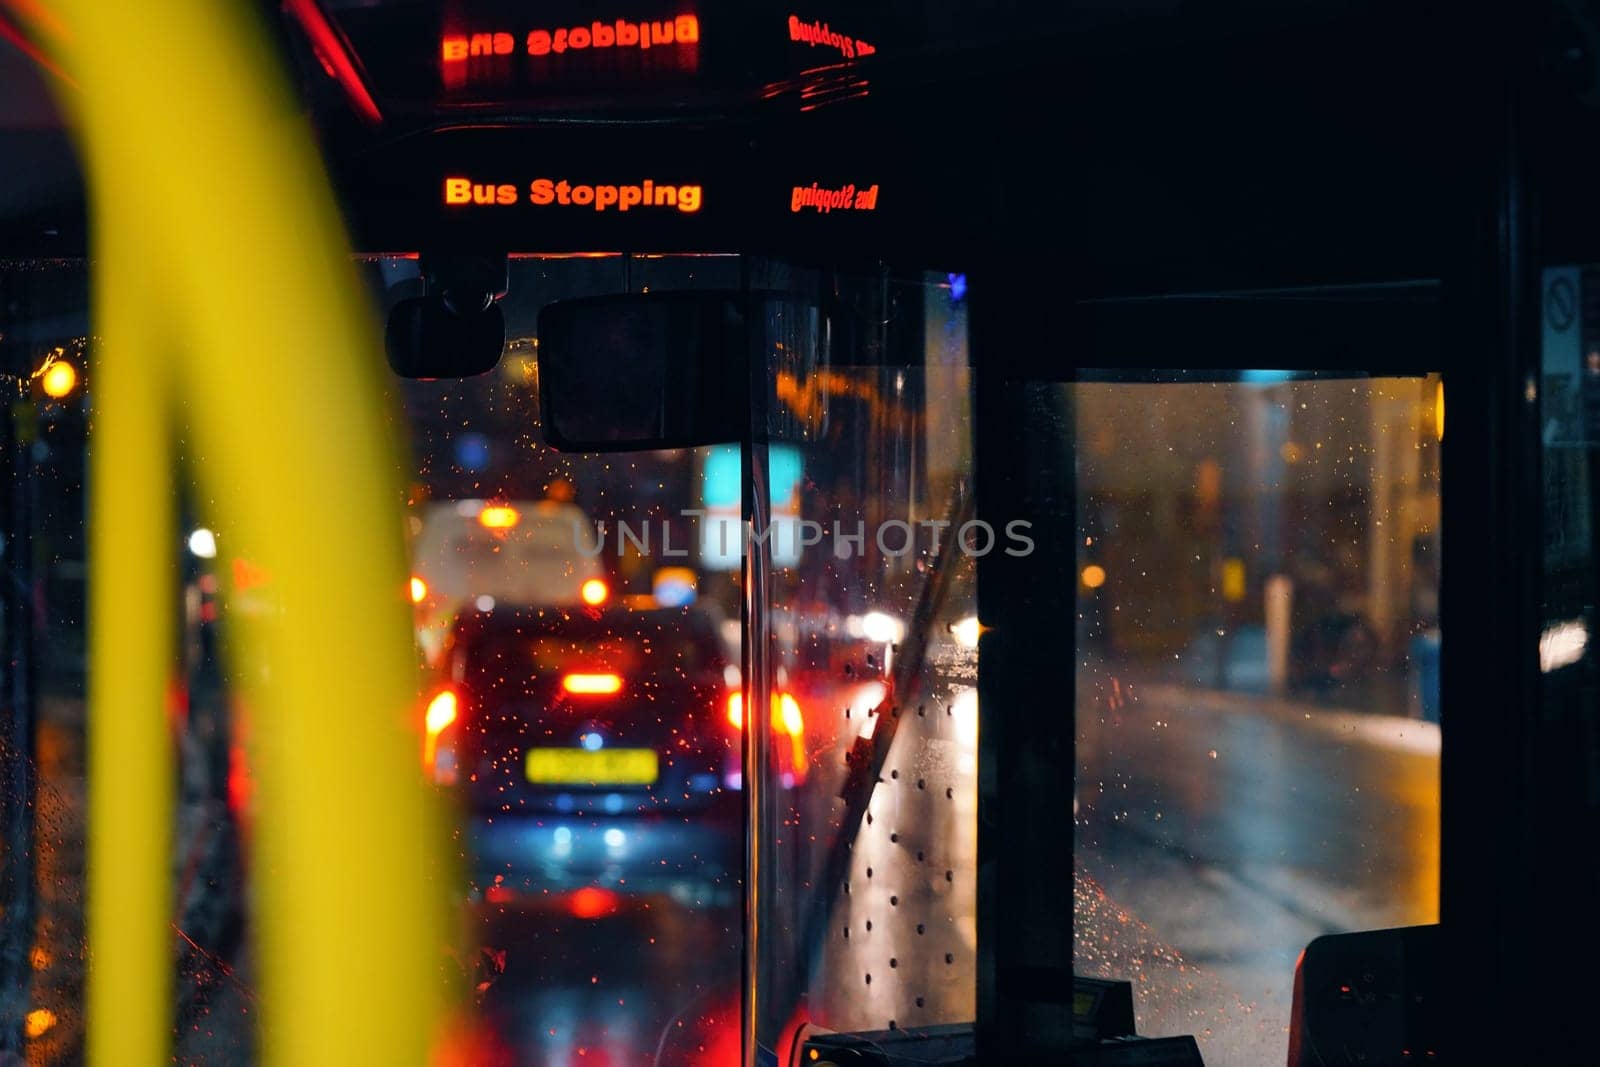 Bus stopping sign flashing in the public transport on rainy evening, blurred road and lights background